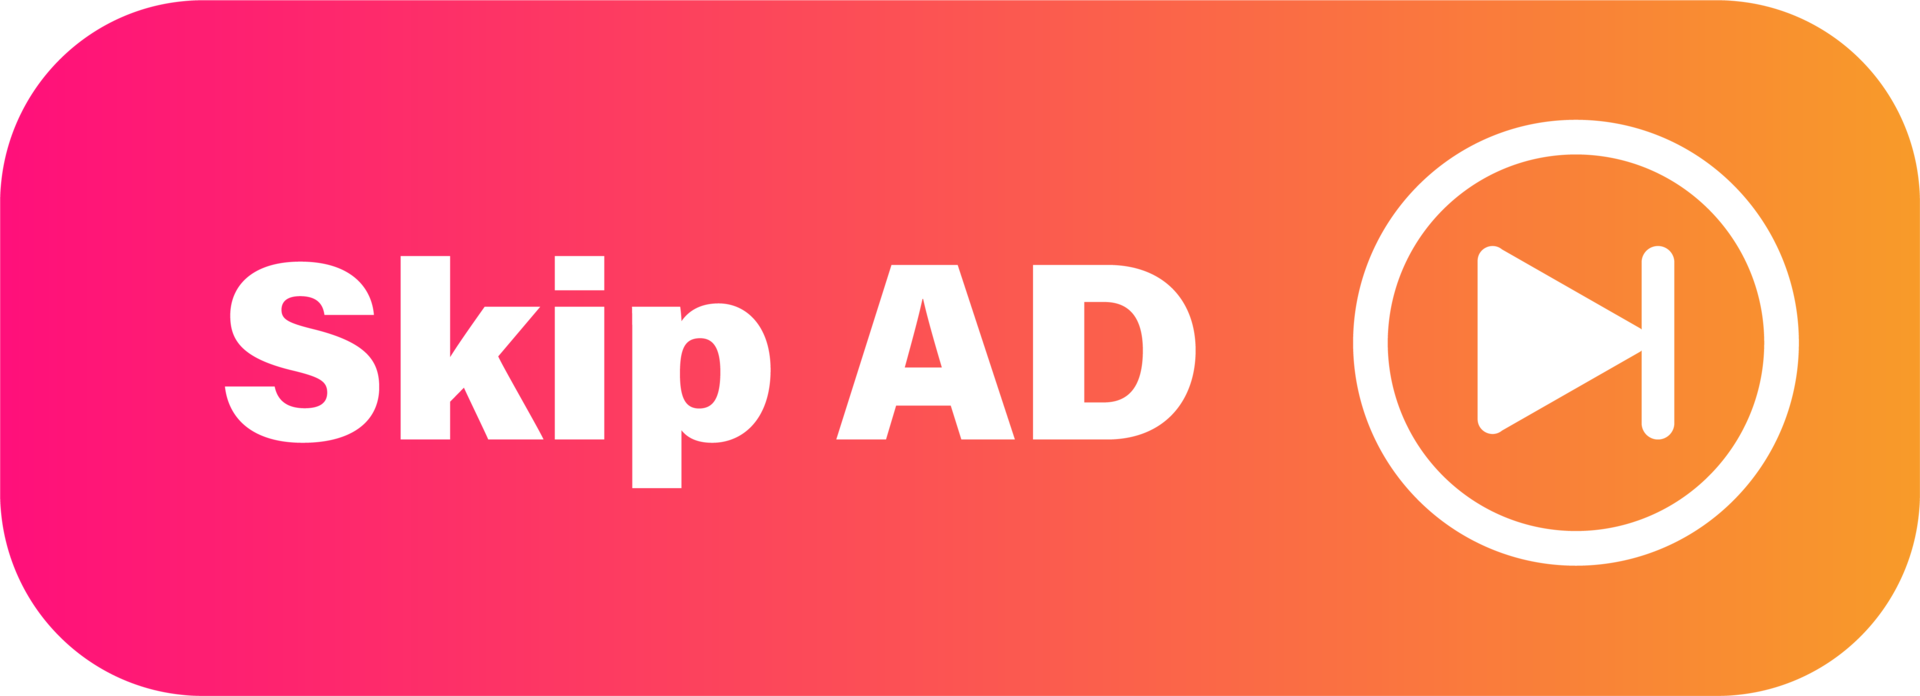 Skip ad button icon illustration. Skip advertisement signs. png